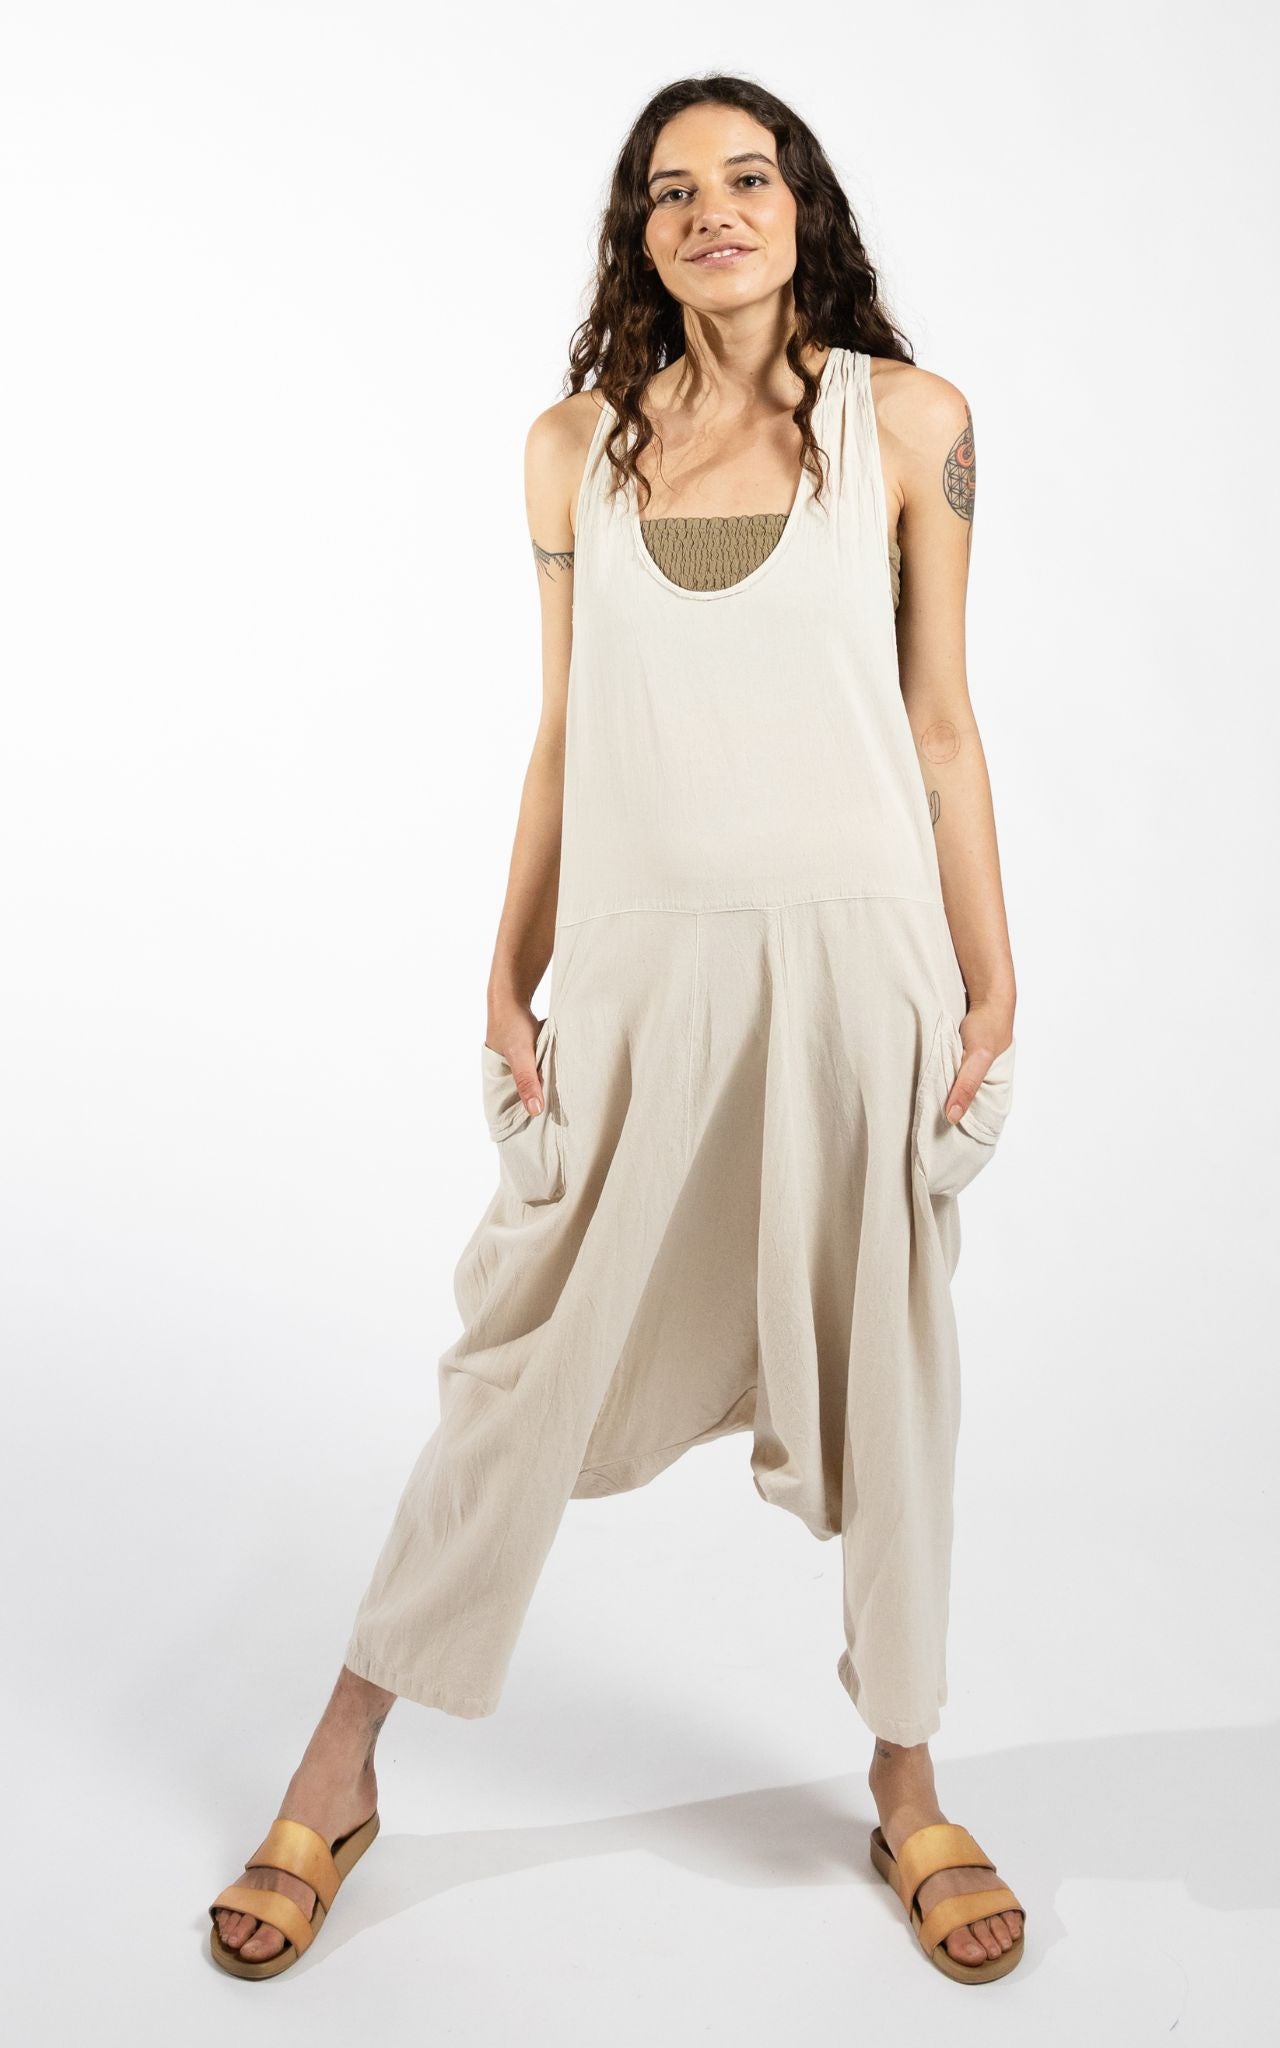 Surya Australia Ethical Cotton 'Bahini' Overalls Dungarees made in Nepal - Oatmeal